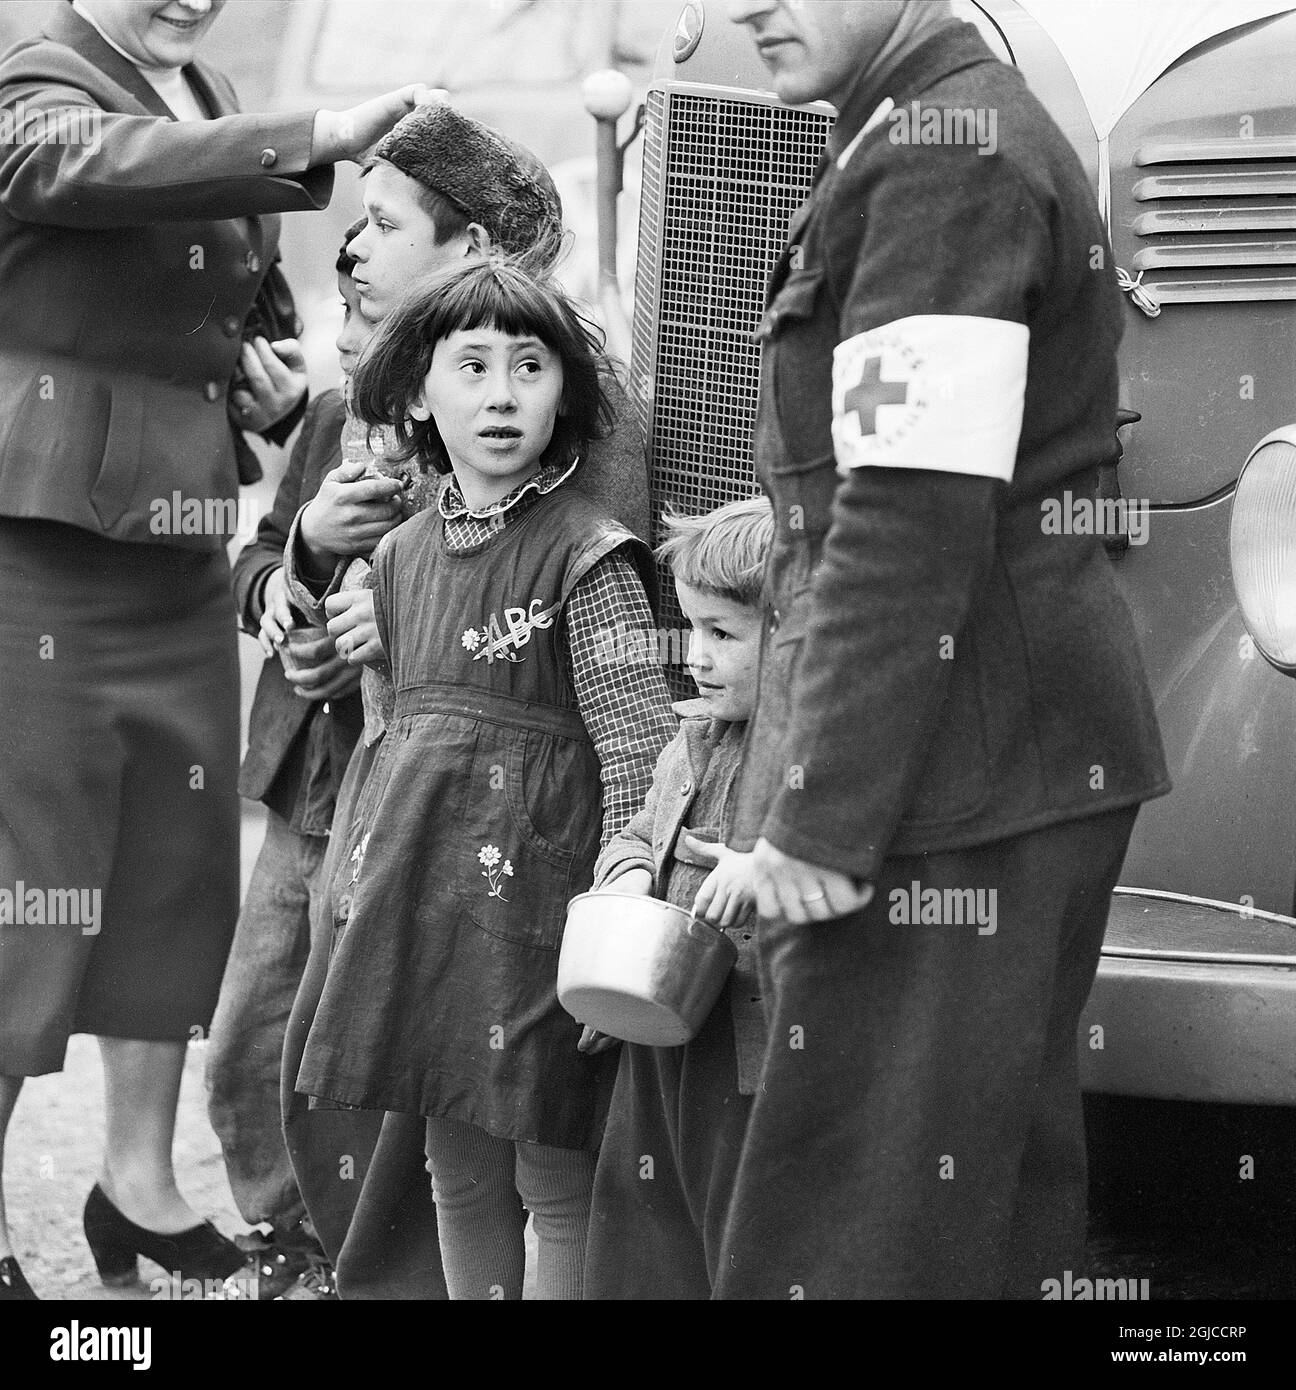 HUNGARY 1956 Red Cross workers take care of Hungarian children refugees at the border between Hungary and Austria, during the nationwide revolution against the Hungarian People's Republic and its Soviet-imposed policies, lasting from 23 October until 10 November 1956. Photo: Anders Engman / Bonnierarkivet / TT / kod: 3010  Stock Photo